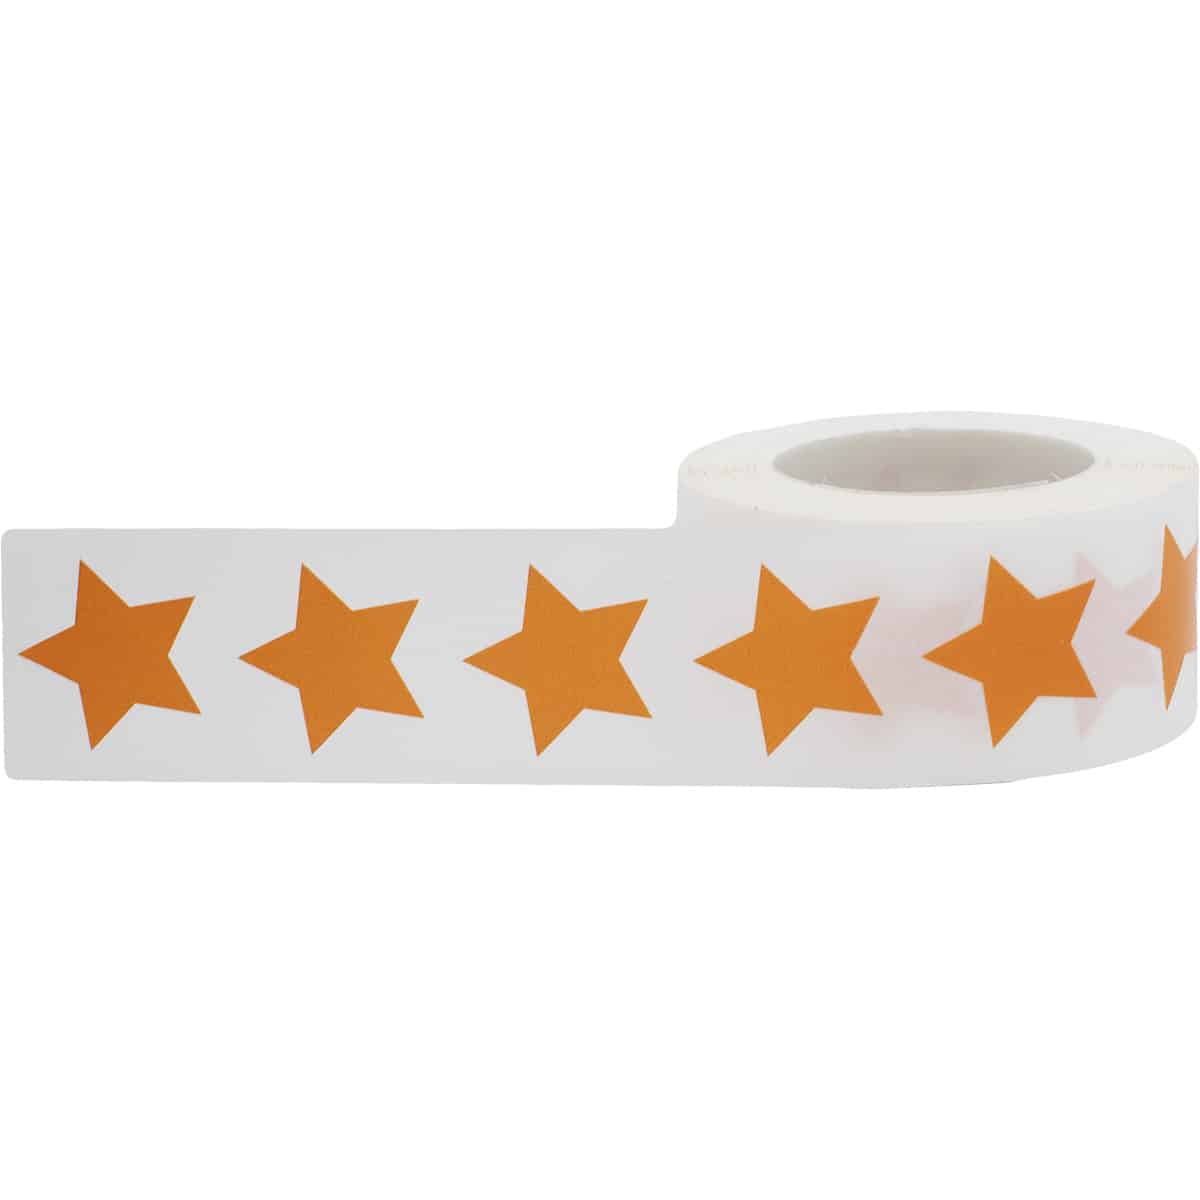 Gold Star Stickers 3/4 Inch